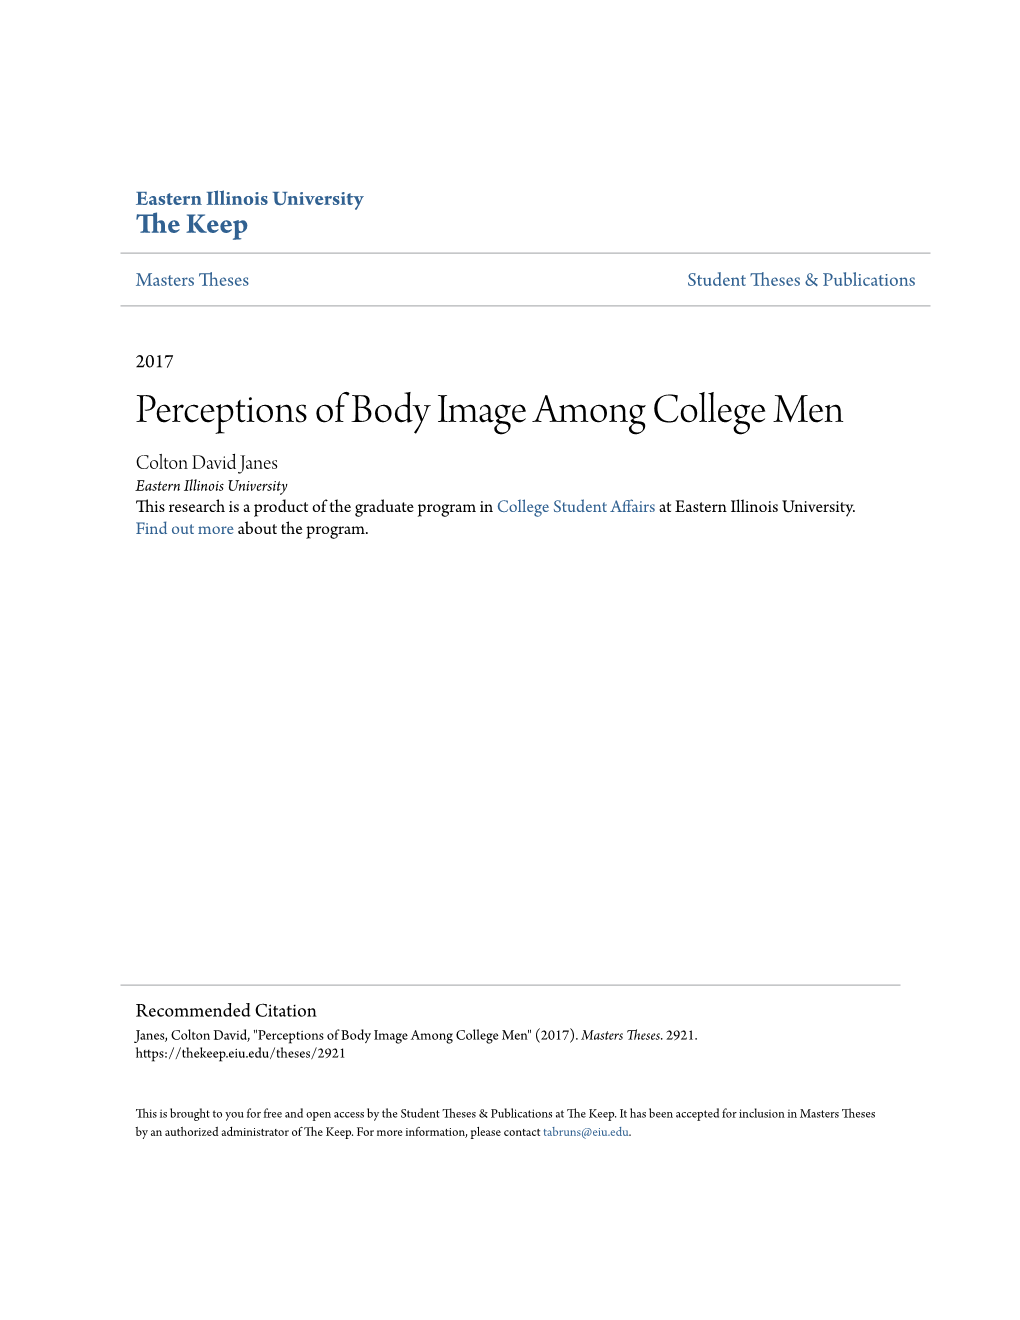 Perceptions of Body Image Among College